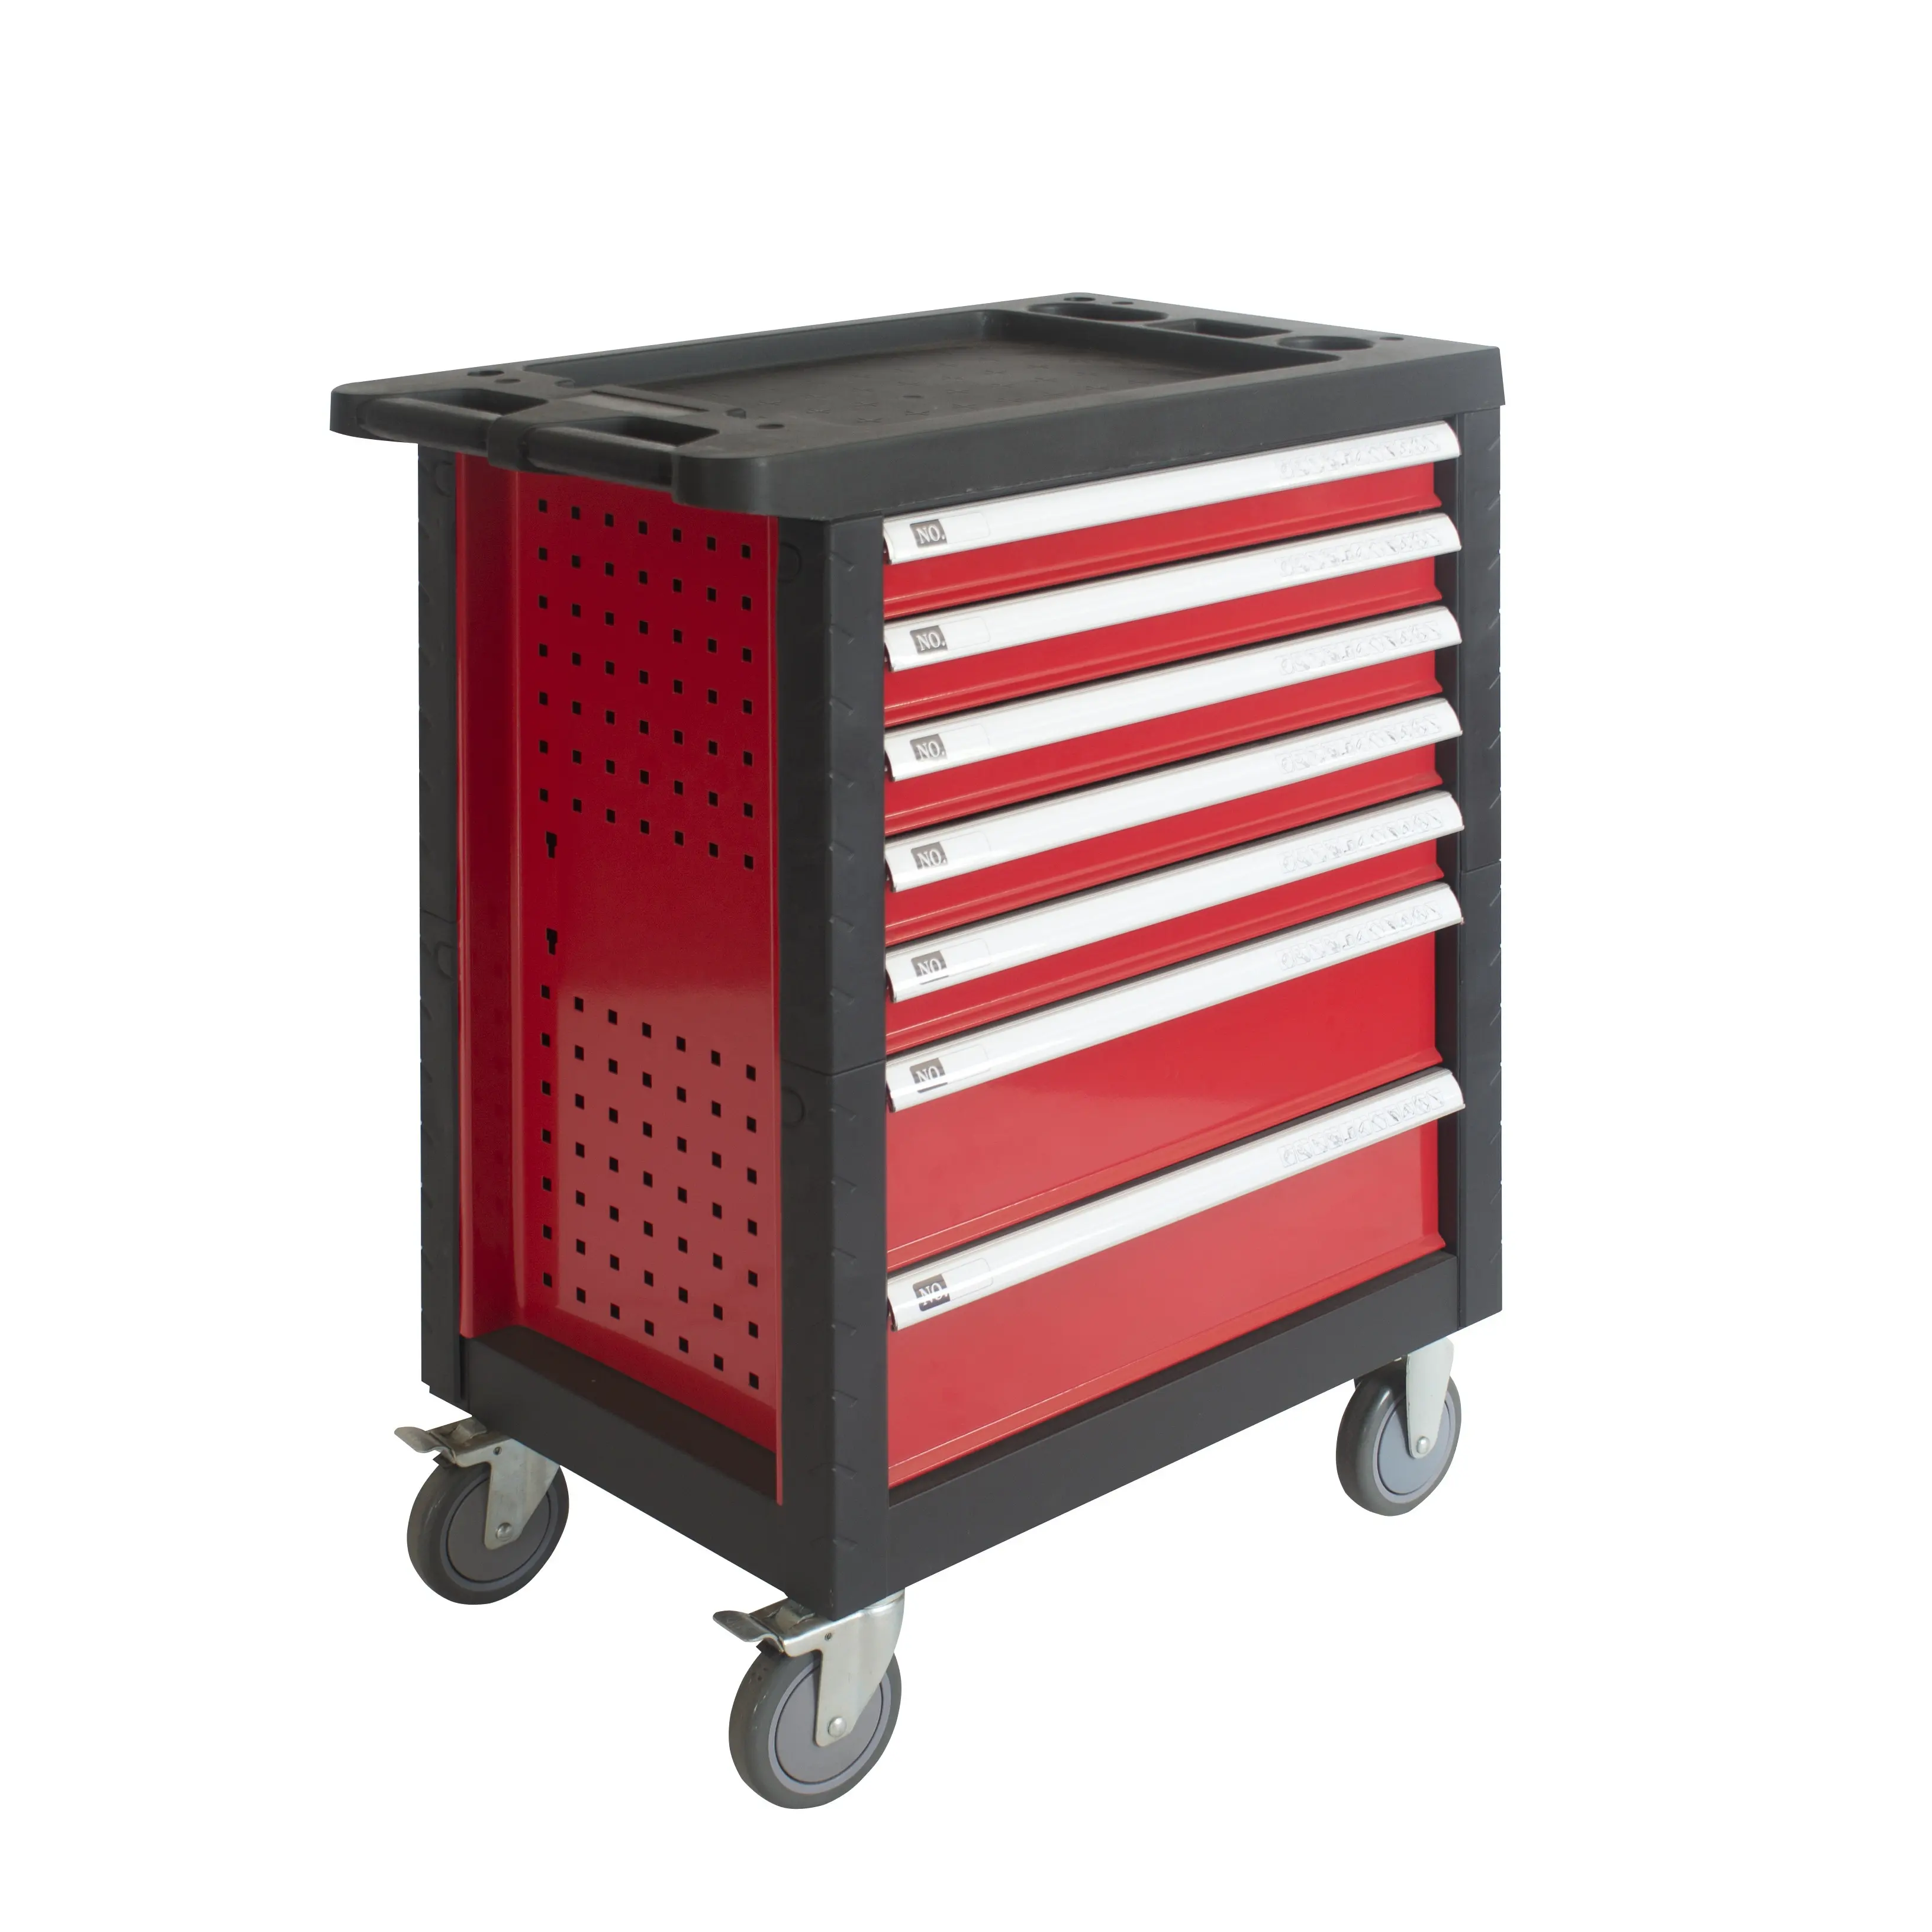 red heavy duty tool box with 7 drawers for hand tools hardware storage